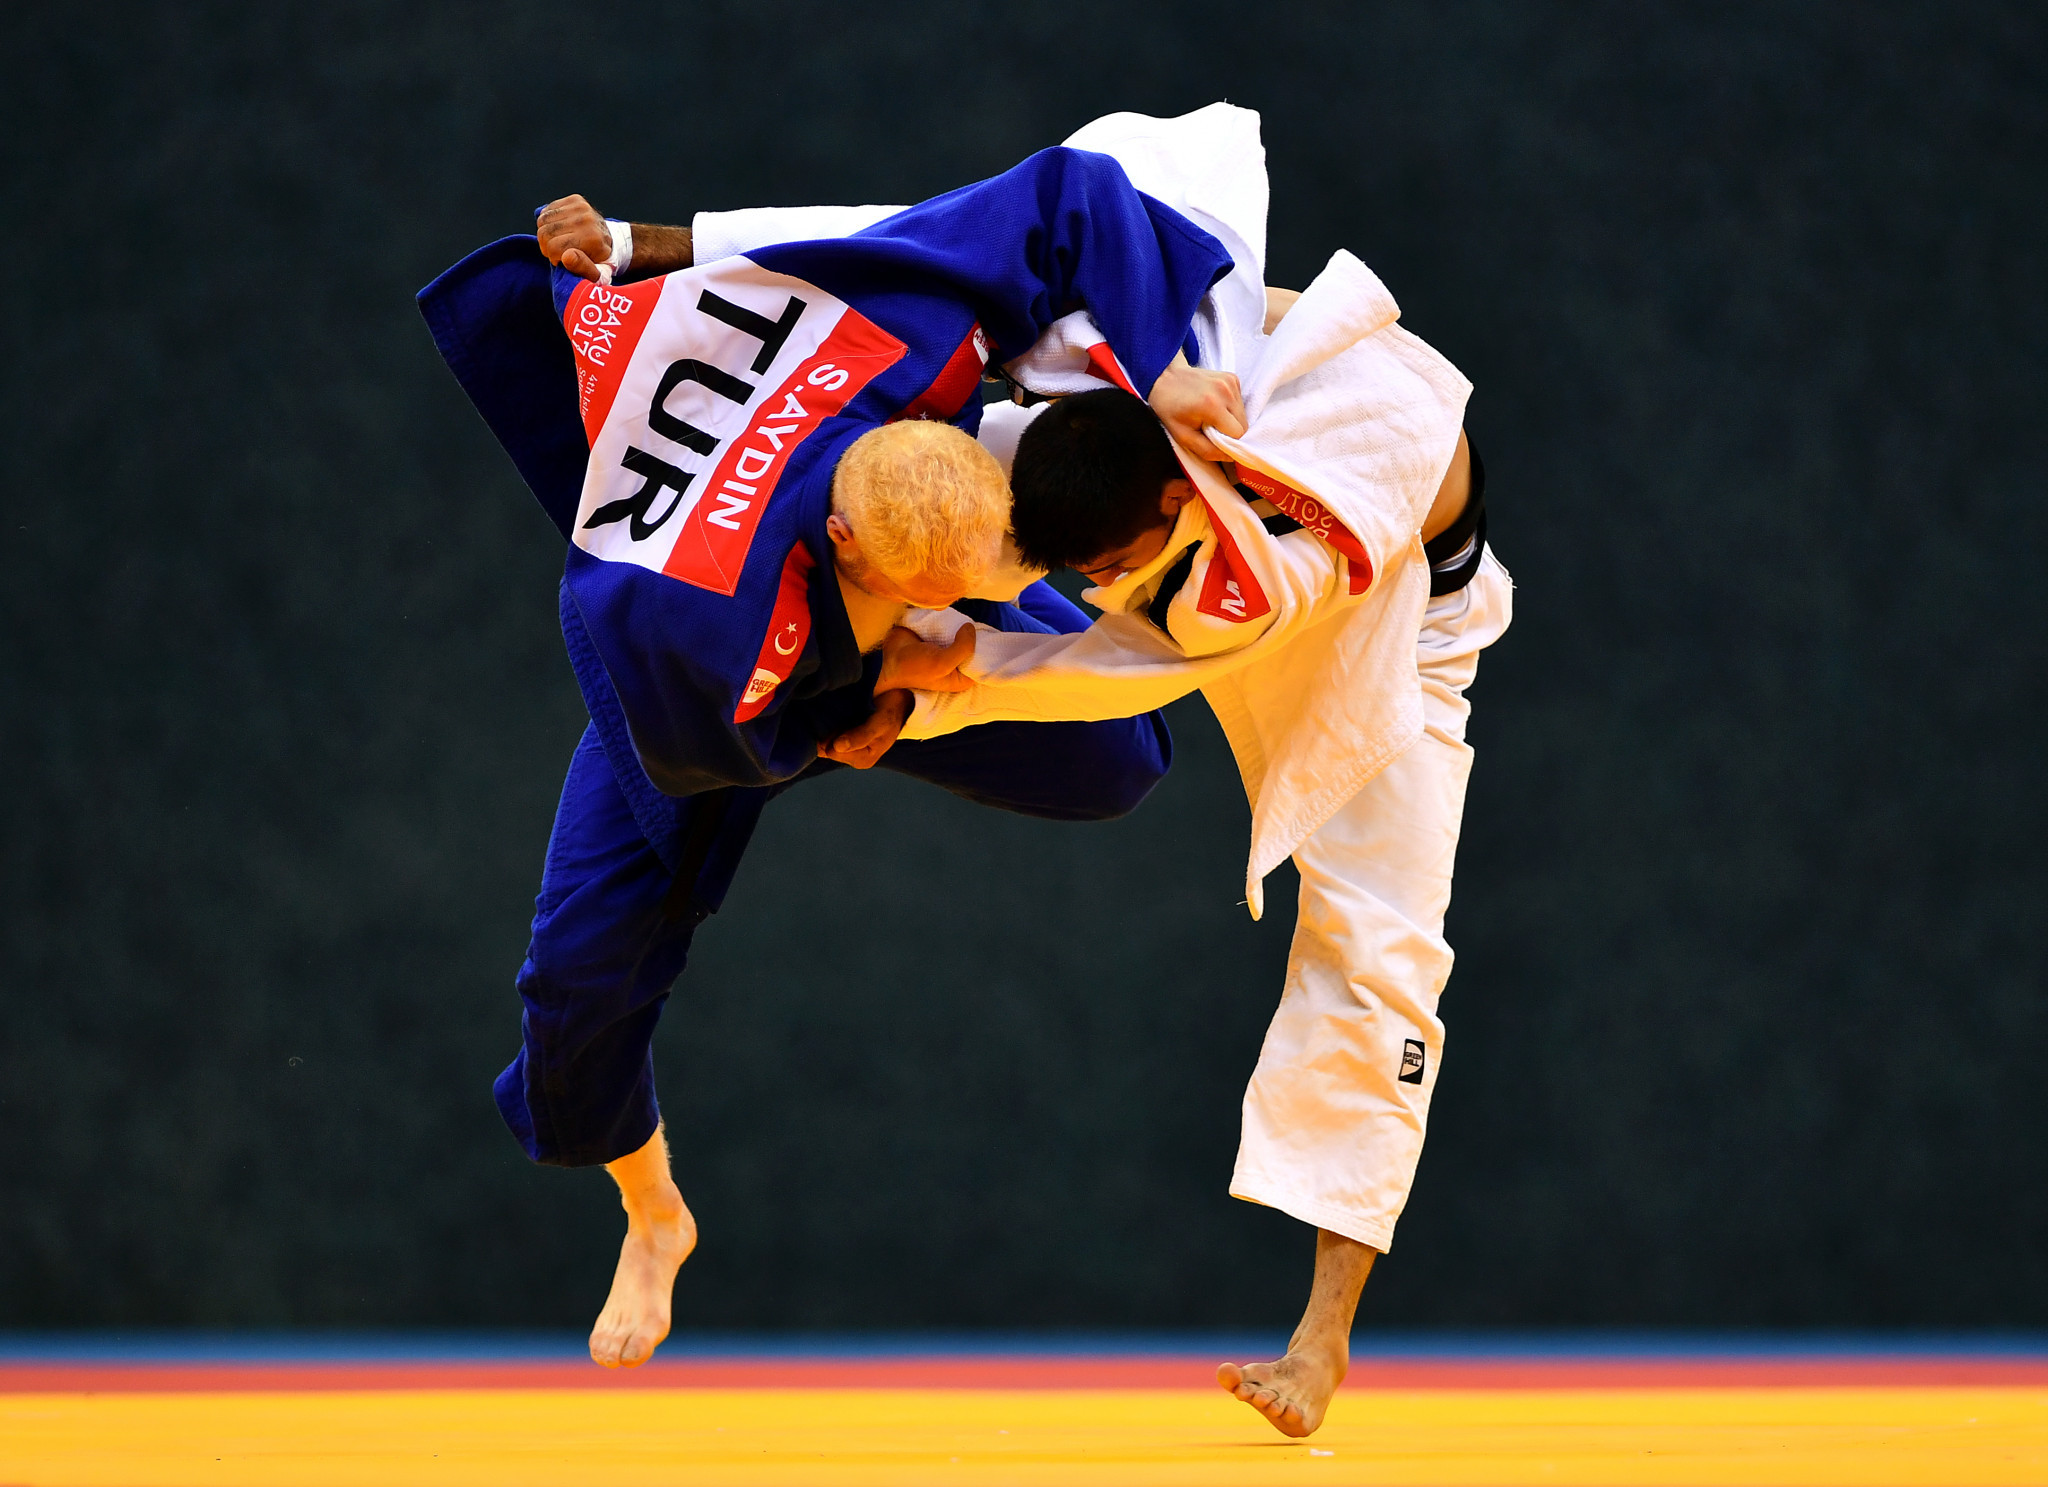 Turkey lead the medals table after the first day of the IBSA Judo World Championships ©Getty Images